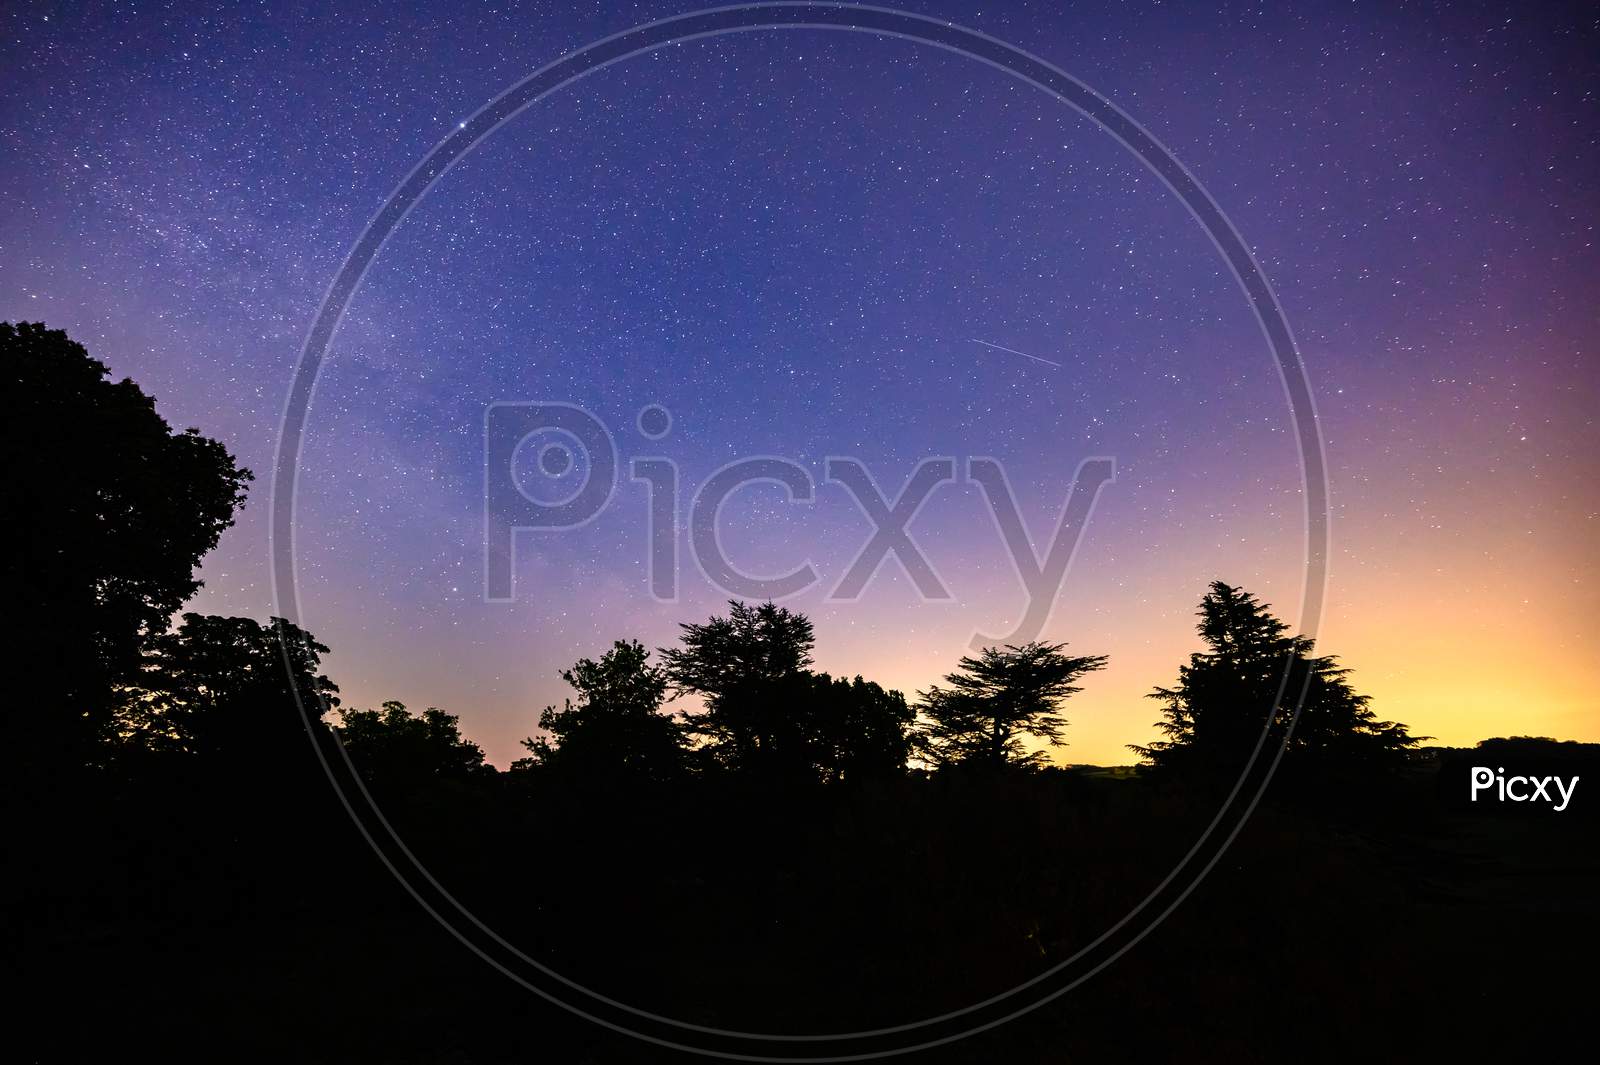 Colourful Long Exposure Star Filled Nightscape With Shooting Stars And Silhouette Trees In The Foreground